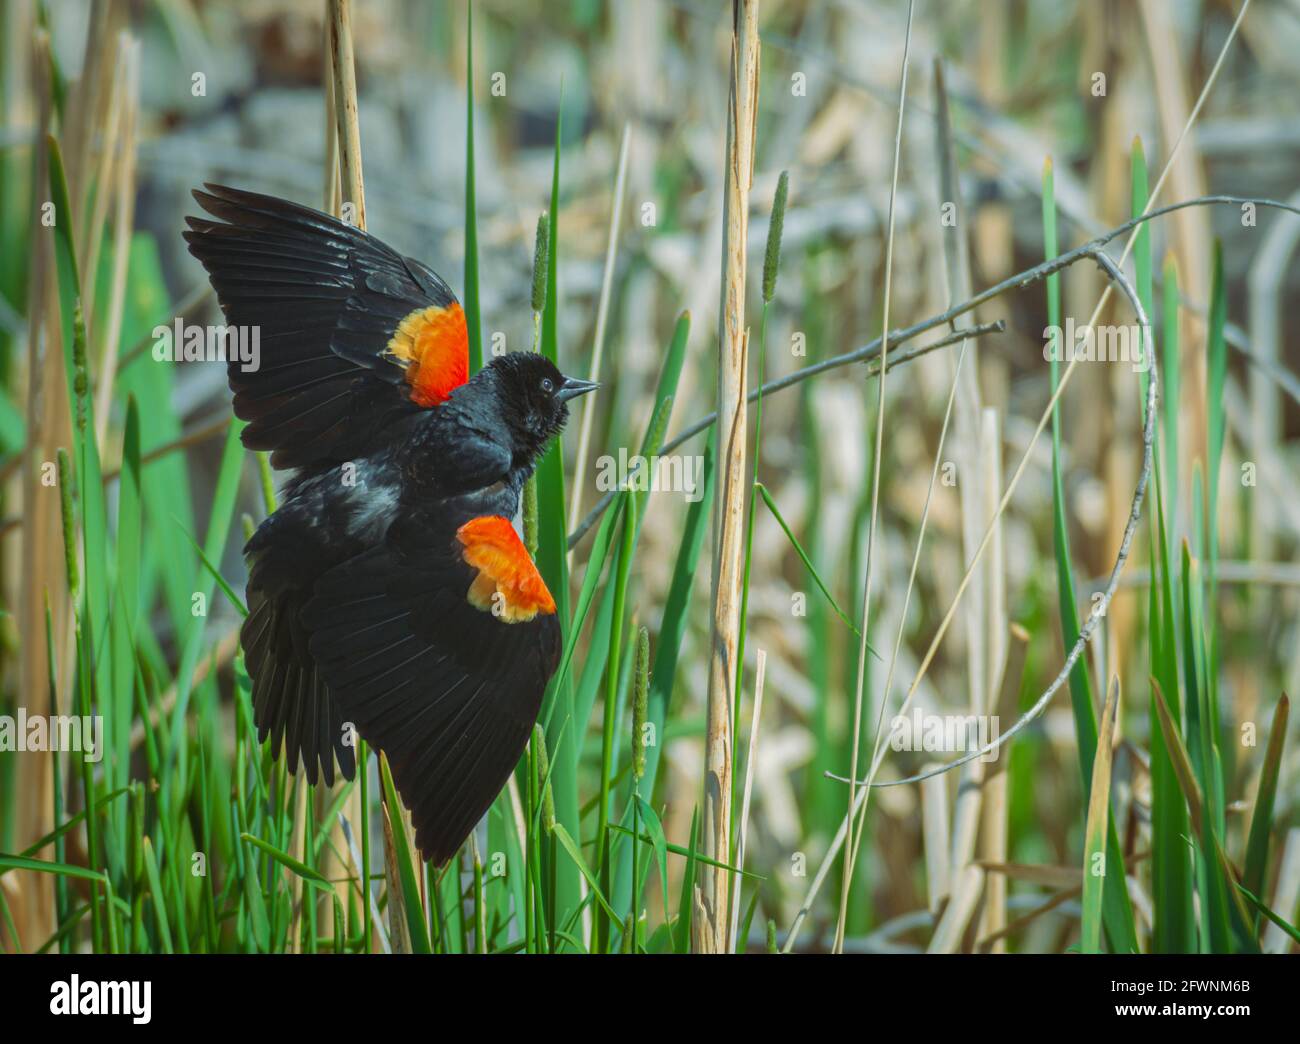 Male Red-Winged Blackbird (Agelaius phoeniceus) with wings spread in territorial display in Cattail marsh, Castle Rock Colorado USA.Photo taken in May. Stock Photo